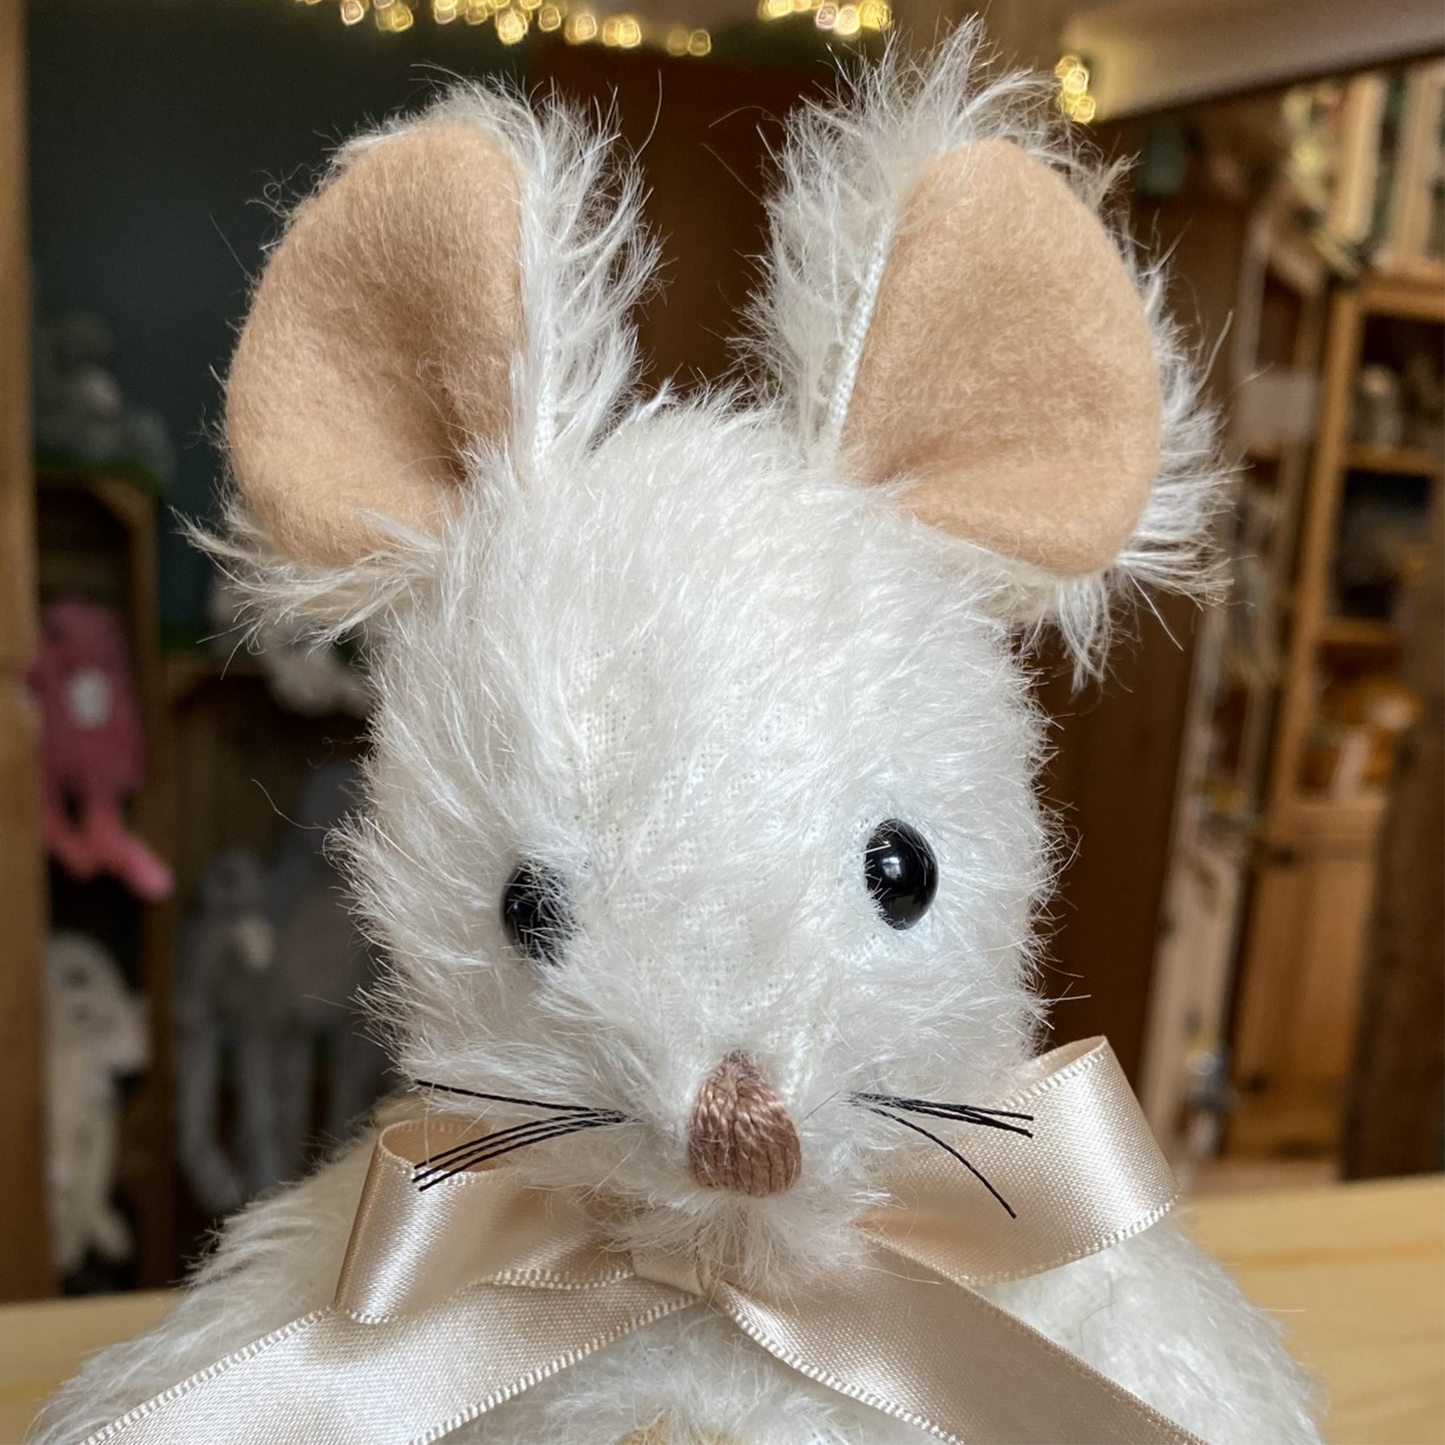 This characterful mouse has a particularly appealing expression, featuring hand-sewn whiskers and a little pinky nose. Her pure white mohair subtly contrasts a peachy-beige tummy, wool felt paws and slender tail.  Each Merrythought soft toy in the Traditional Collection is presented with a drawstring bag, to help keep your new companion clean and dust-free.